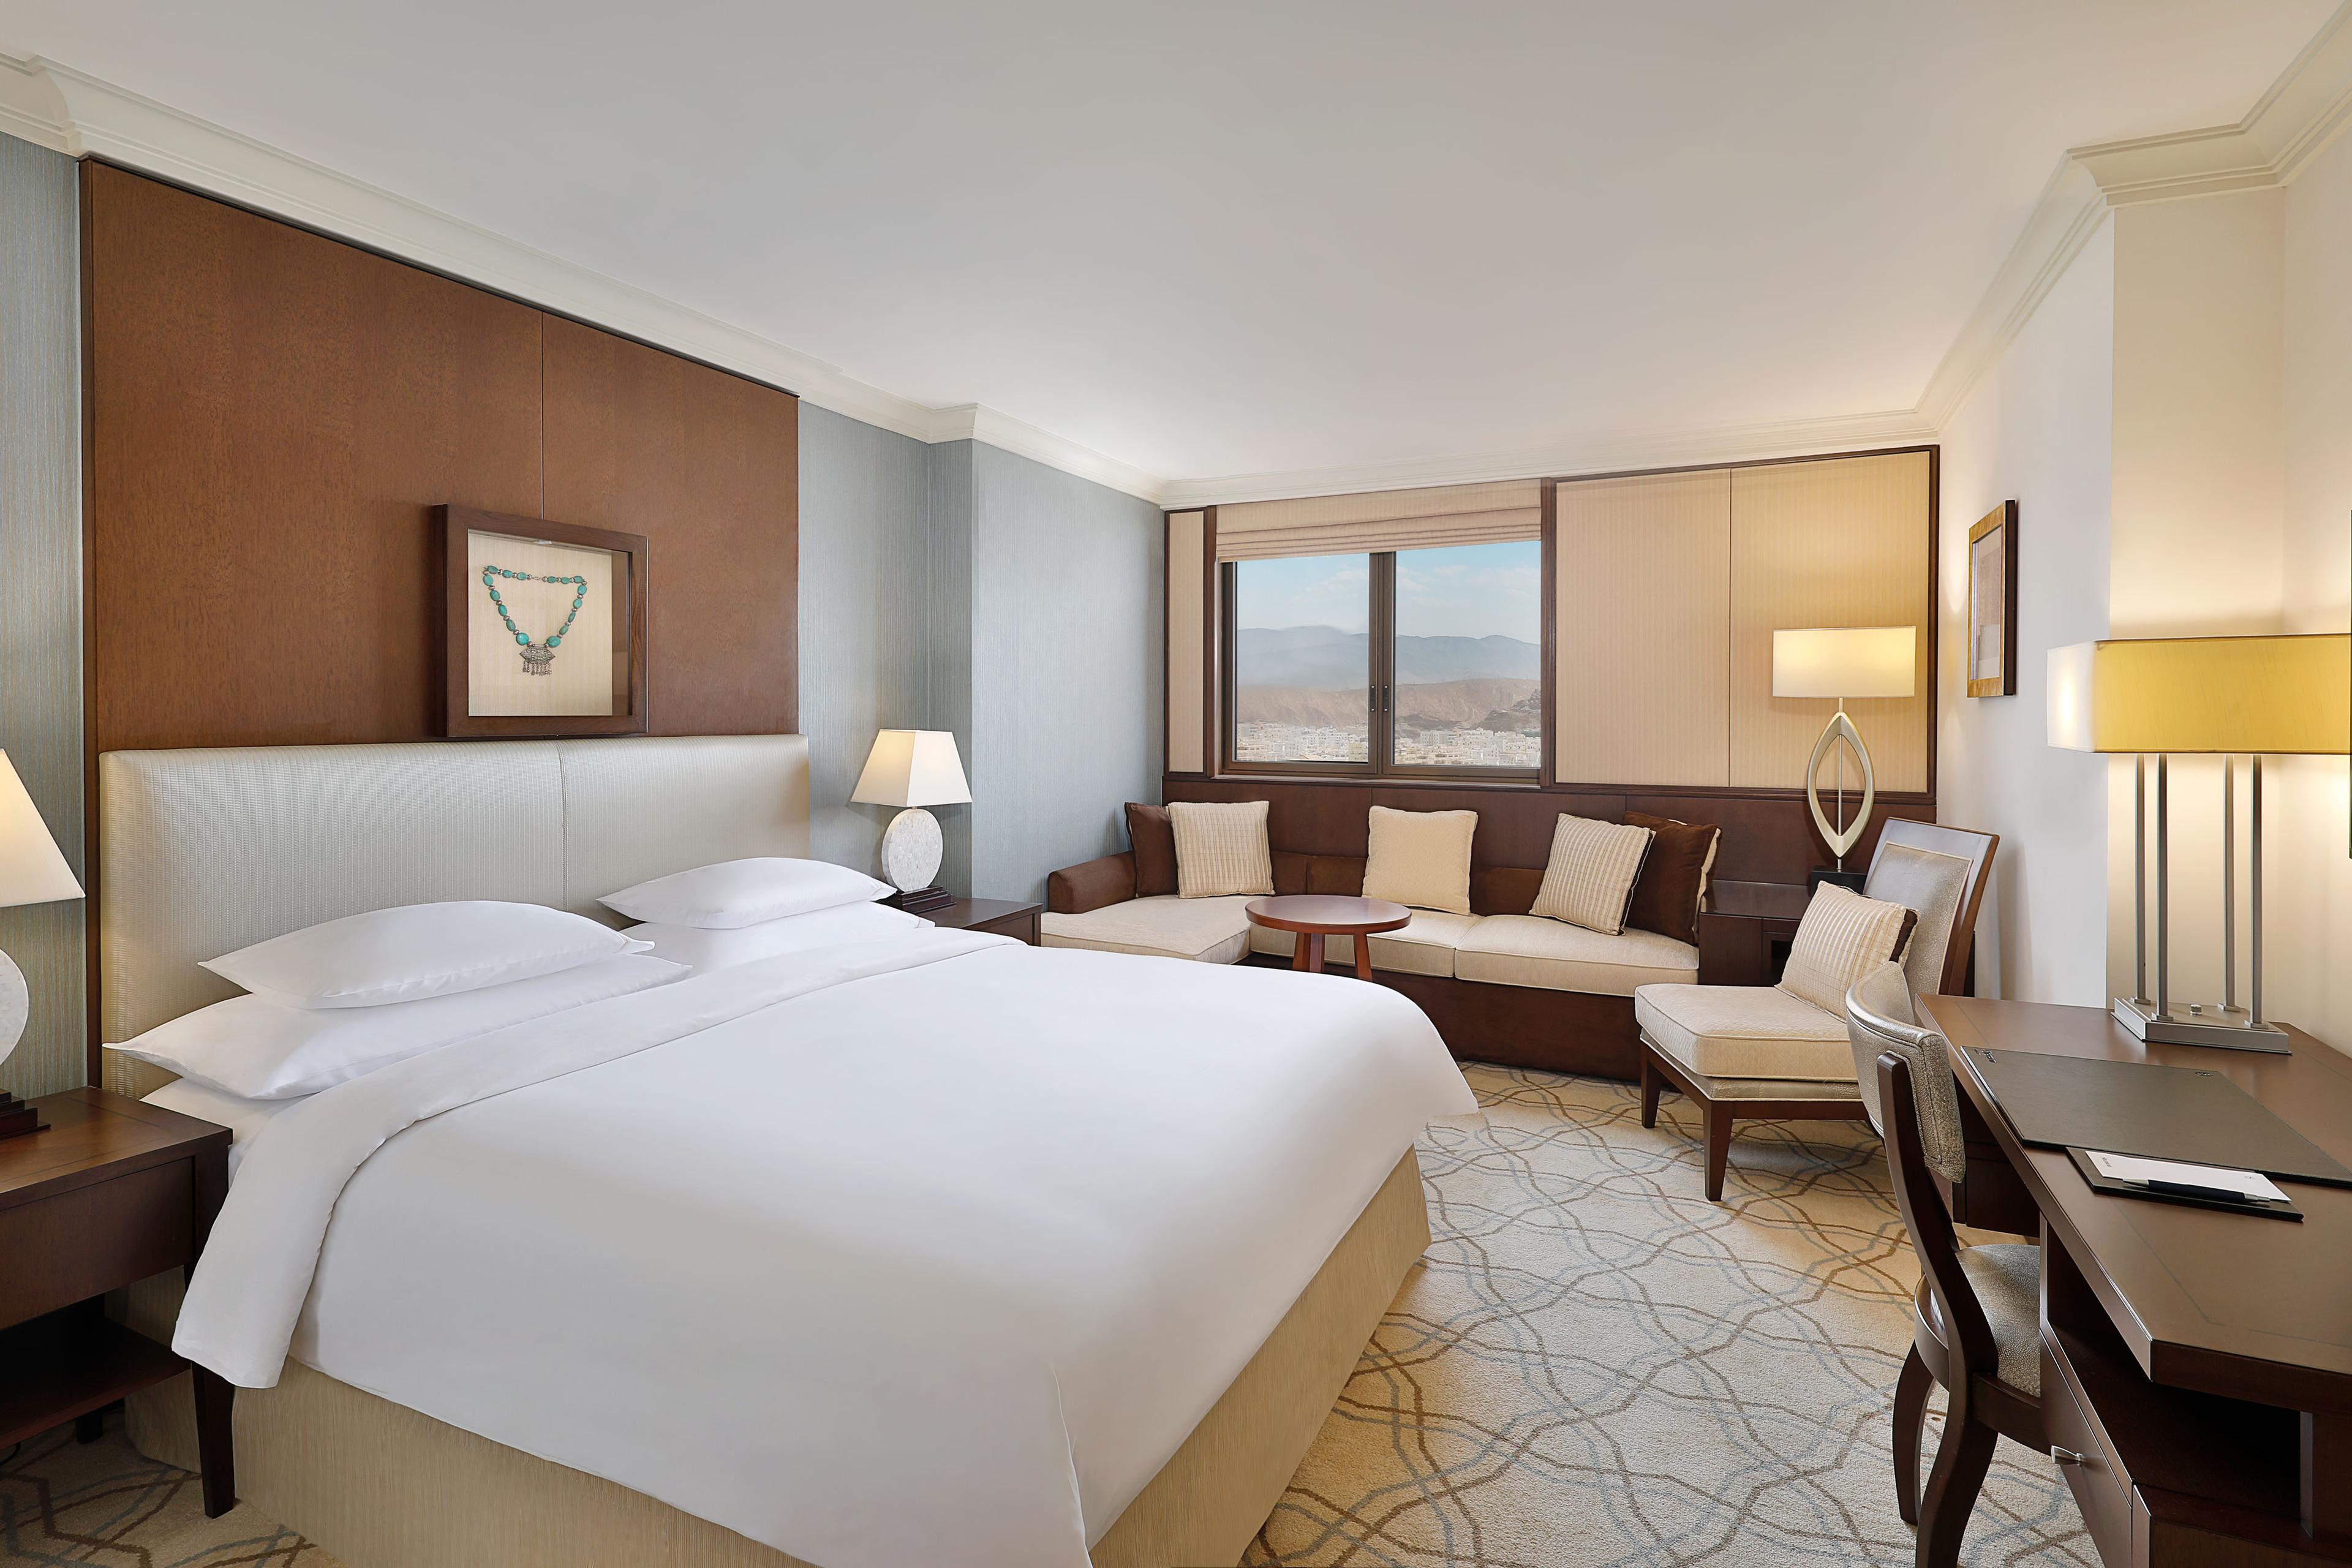 Our 36-square-meter Deluxe Club Room will envelop you in luxury and comfort, while also offering access to our 5-star Sheraton Club.